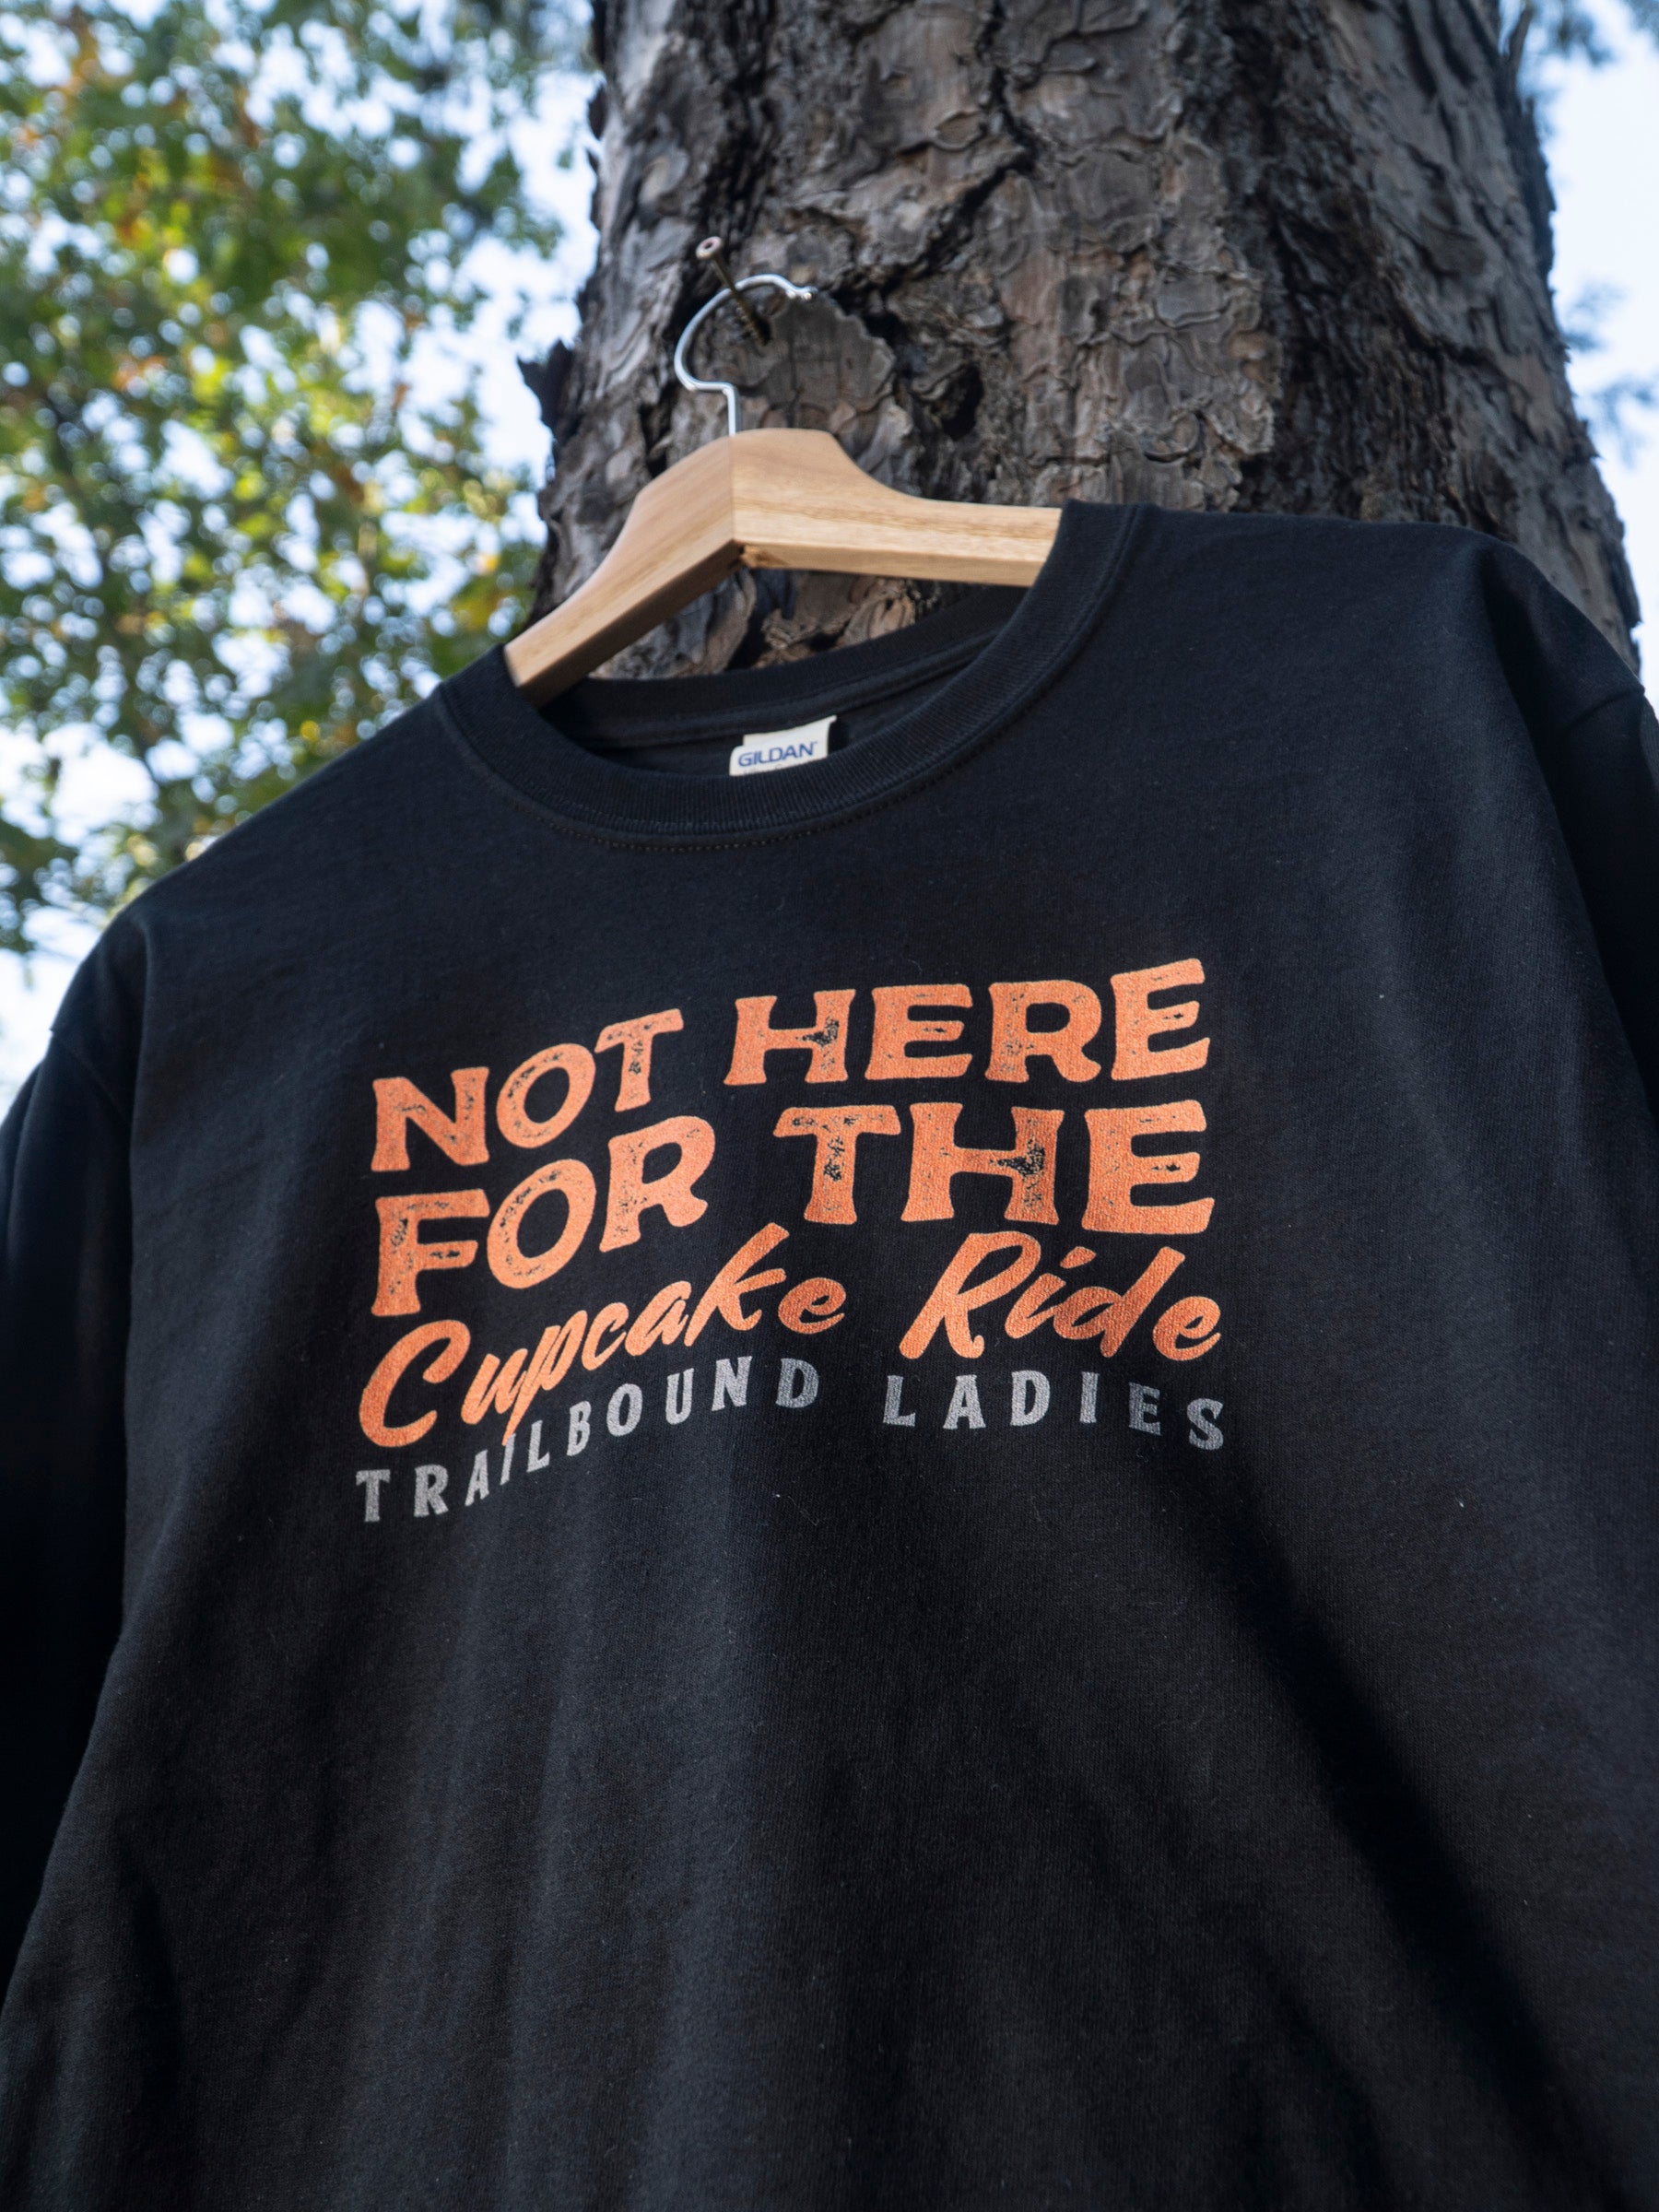 Not Here For The Cupcake Ride- Trailbound Ladies  Long Sleeve Shirt